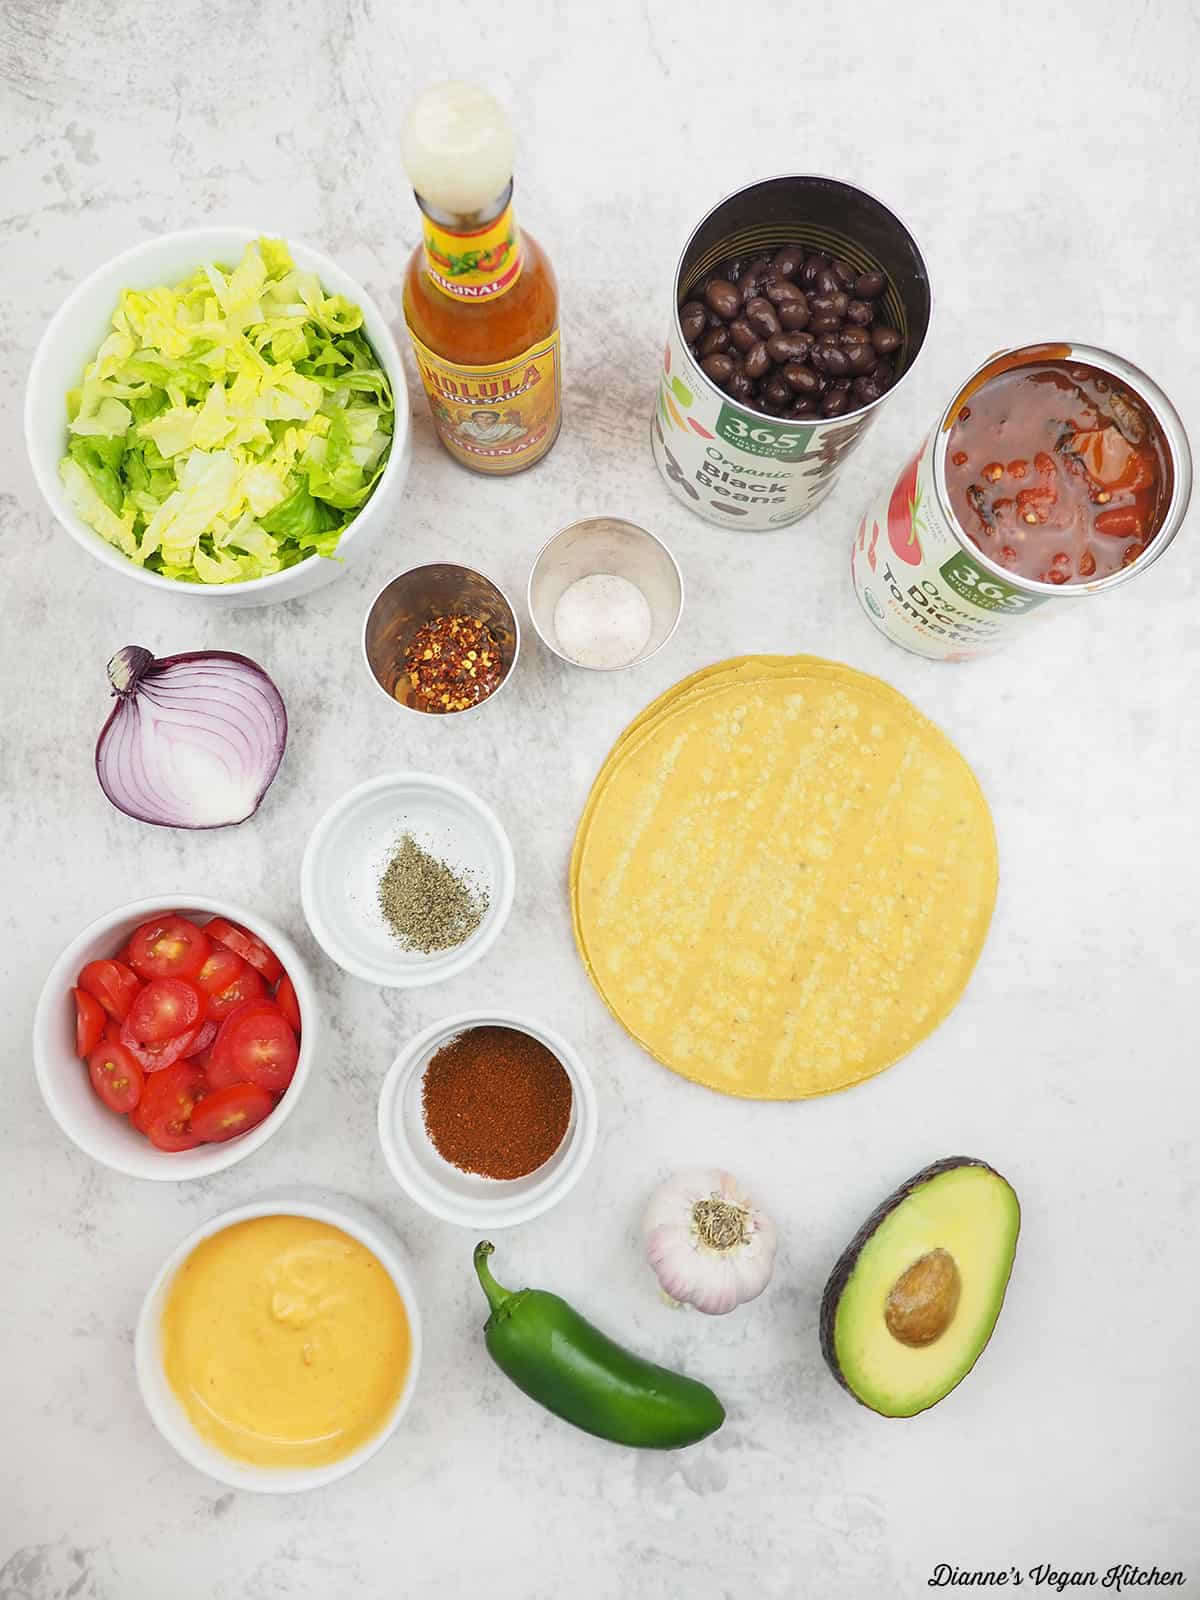 lettuce, hot sauce, black beans, diced tomatoes, tostadas, avocado, onion, jalapeno, garlic, cheese sauce, spices, tomatoes, onion